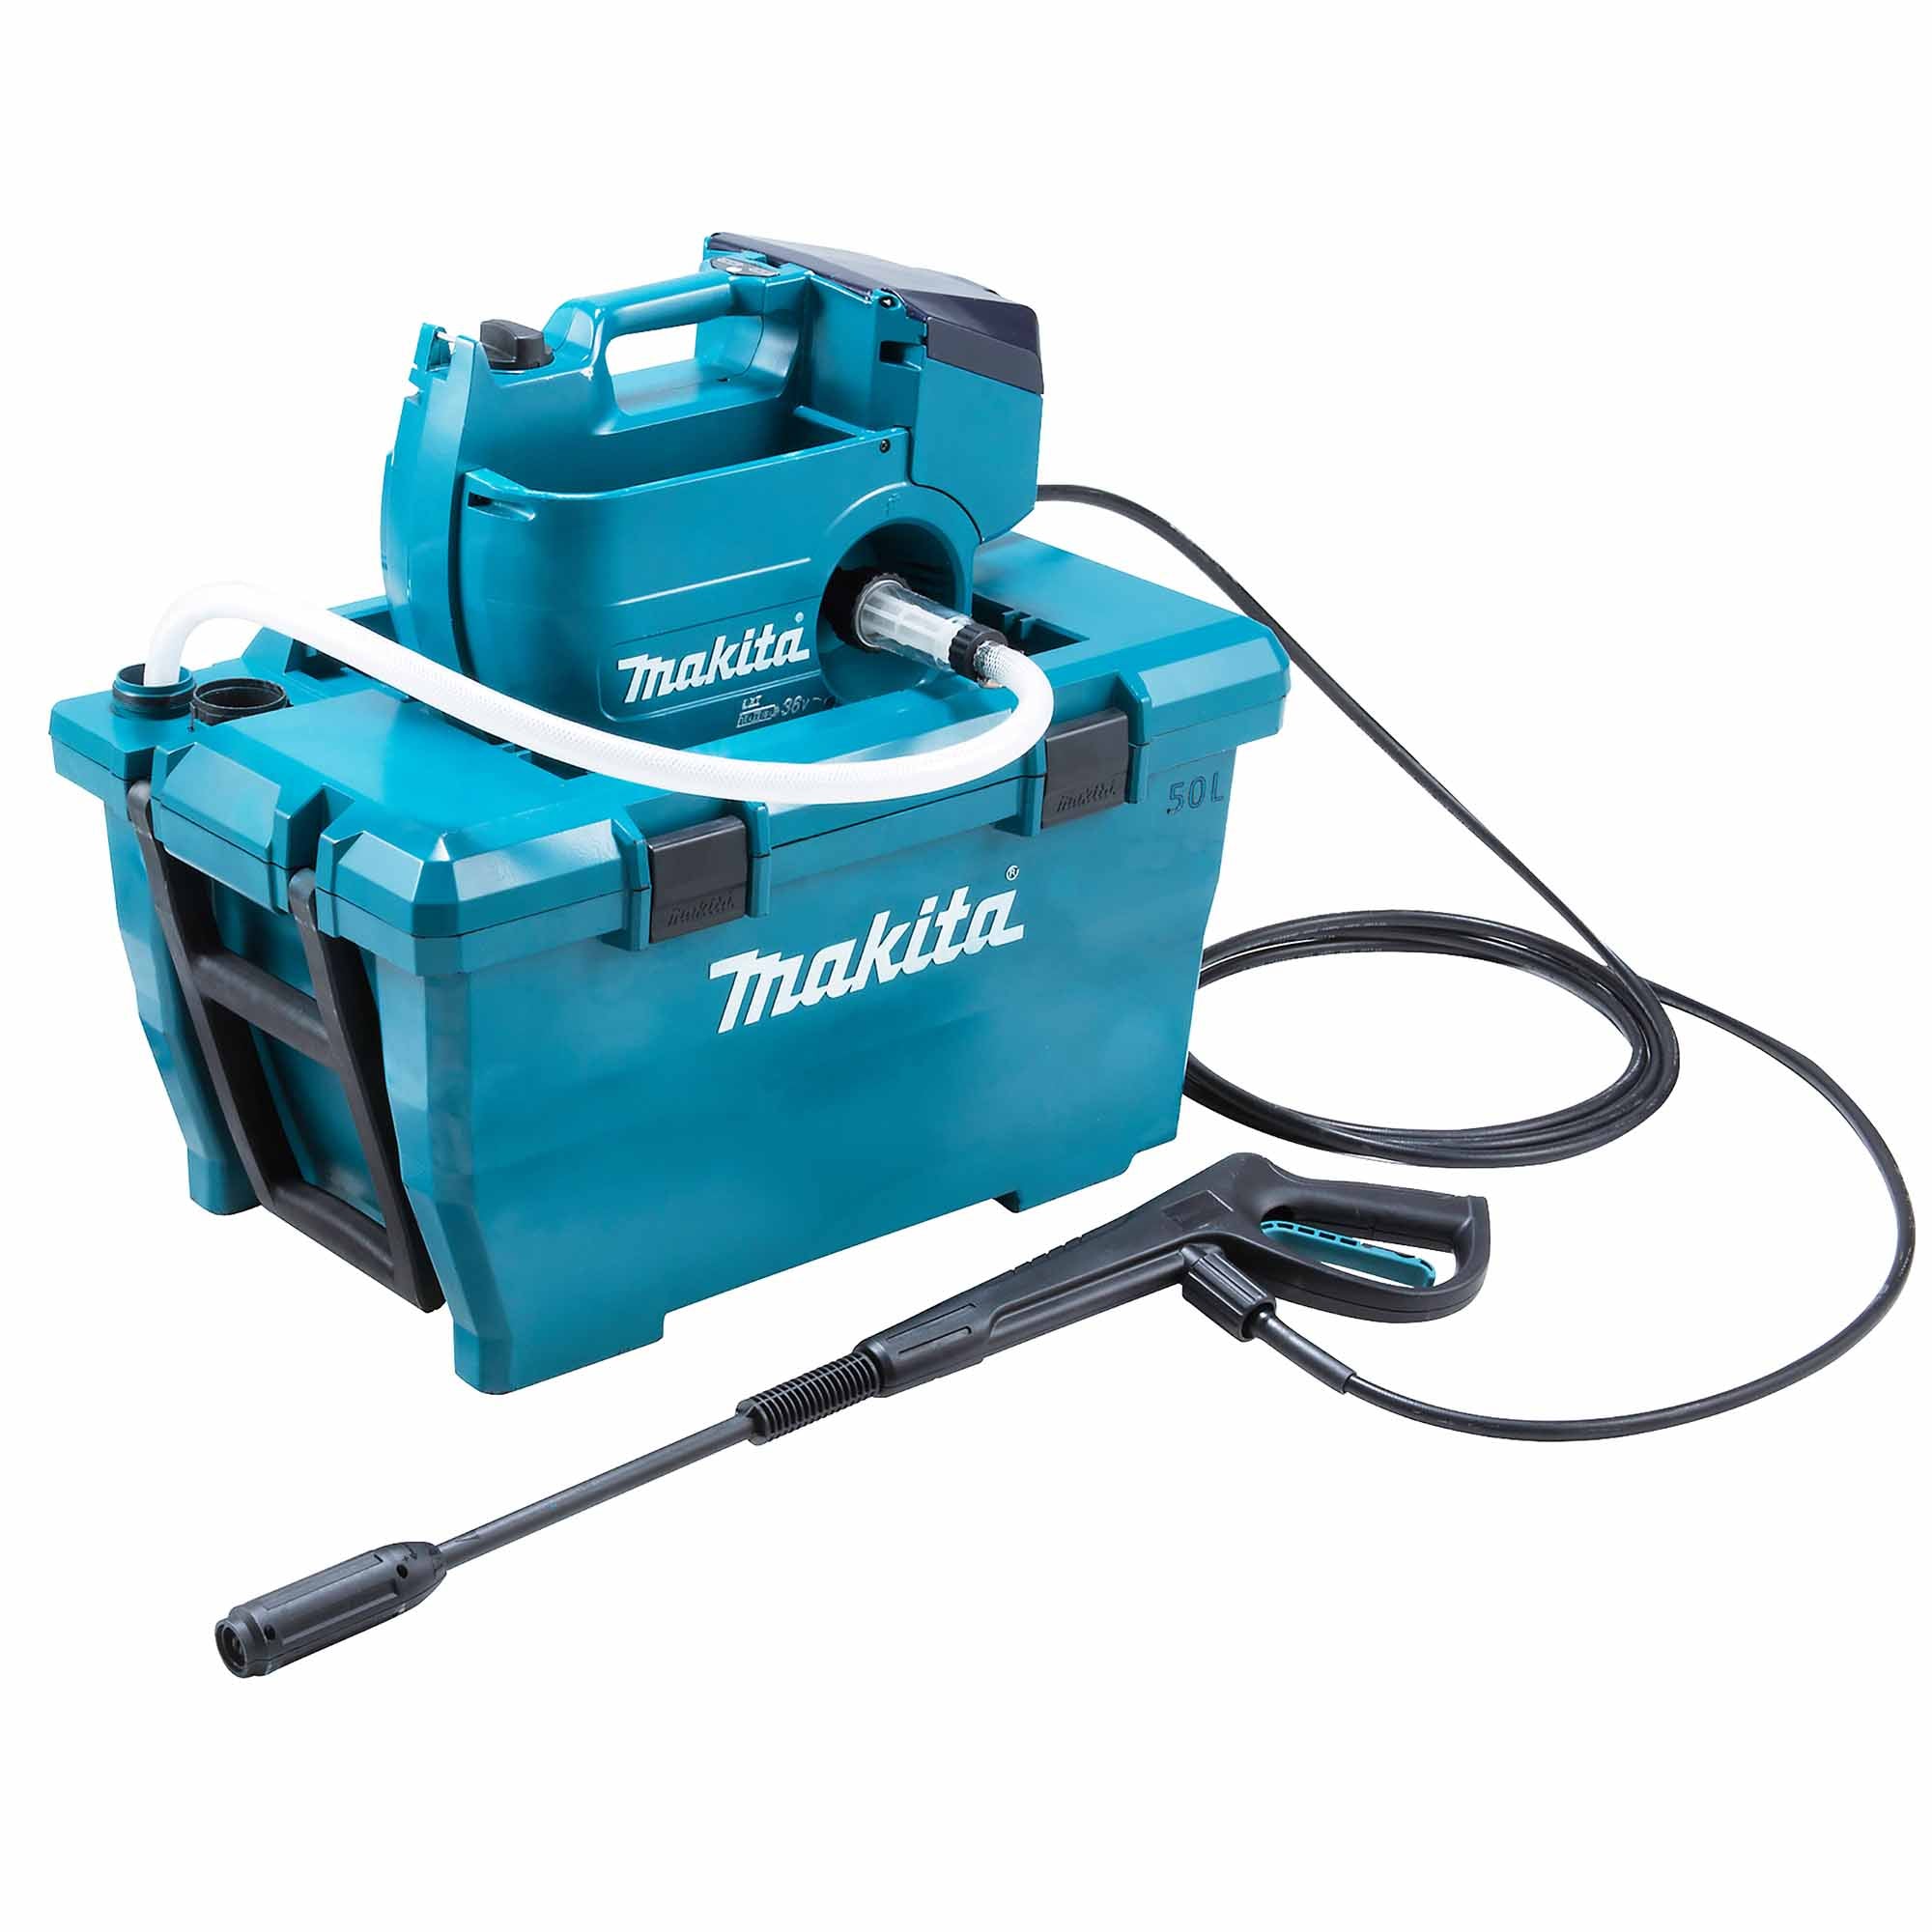 Makita DHW080ZK 18Vx2 cold pressure washer